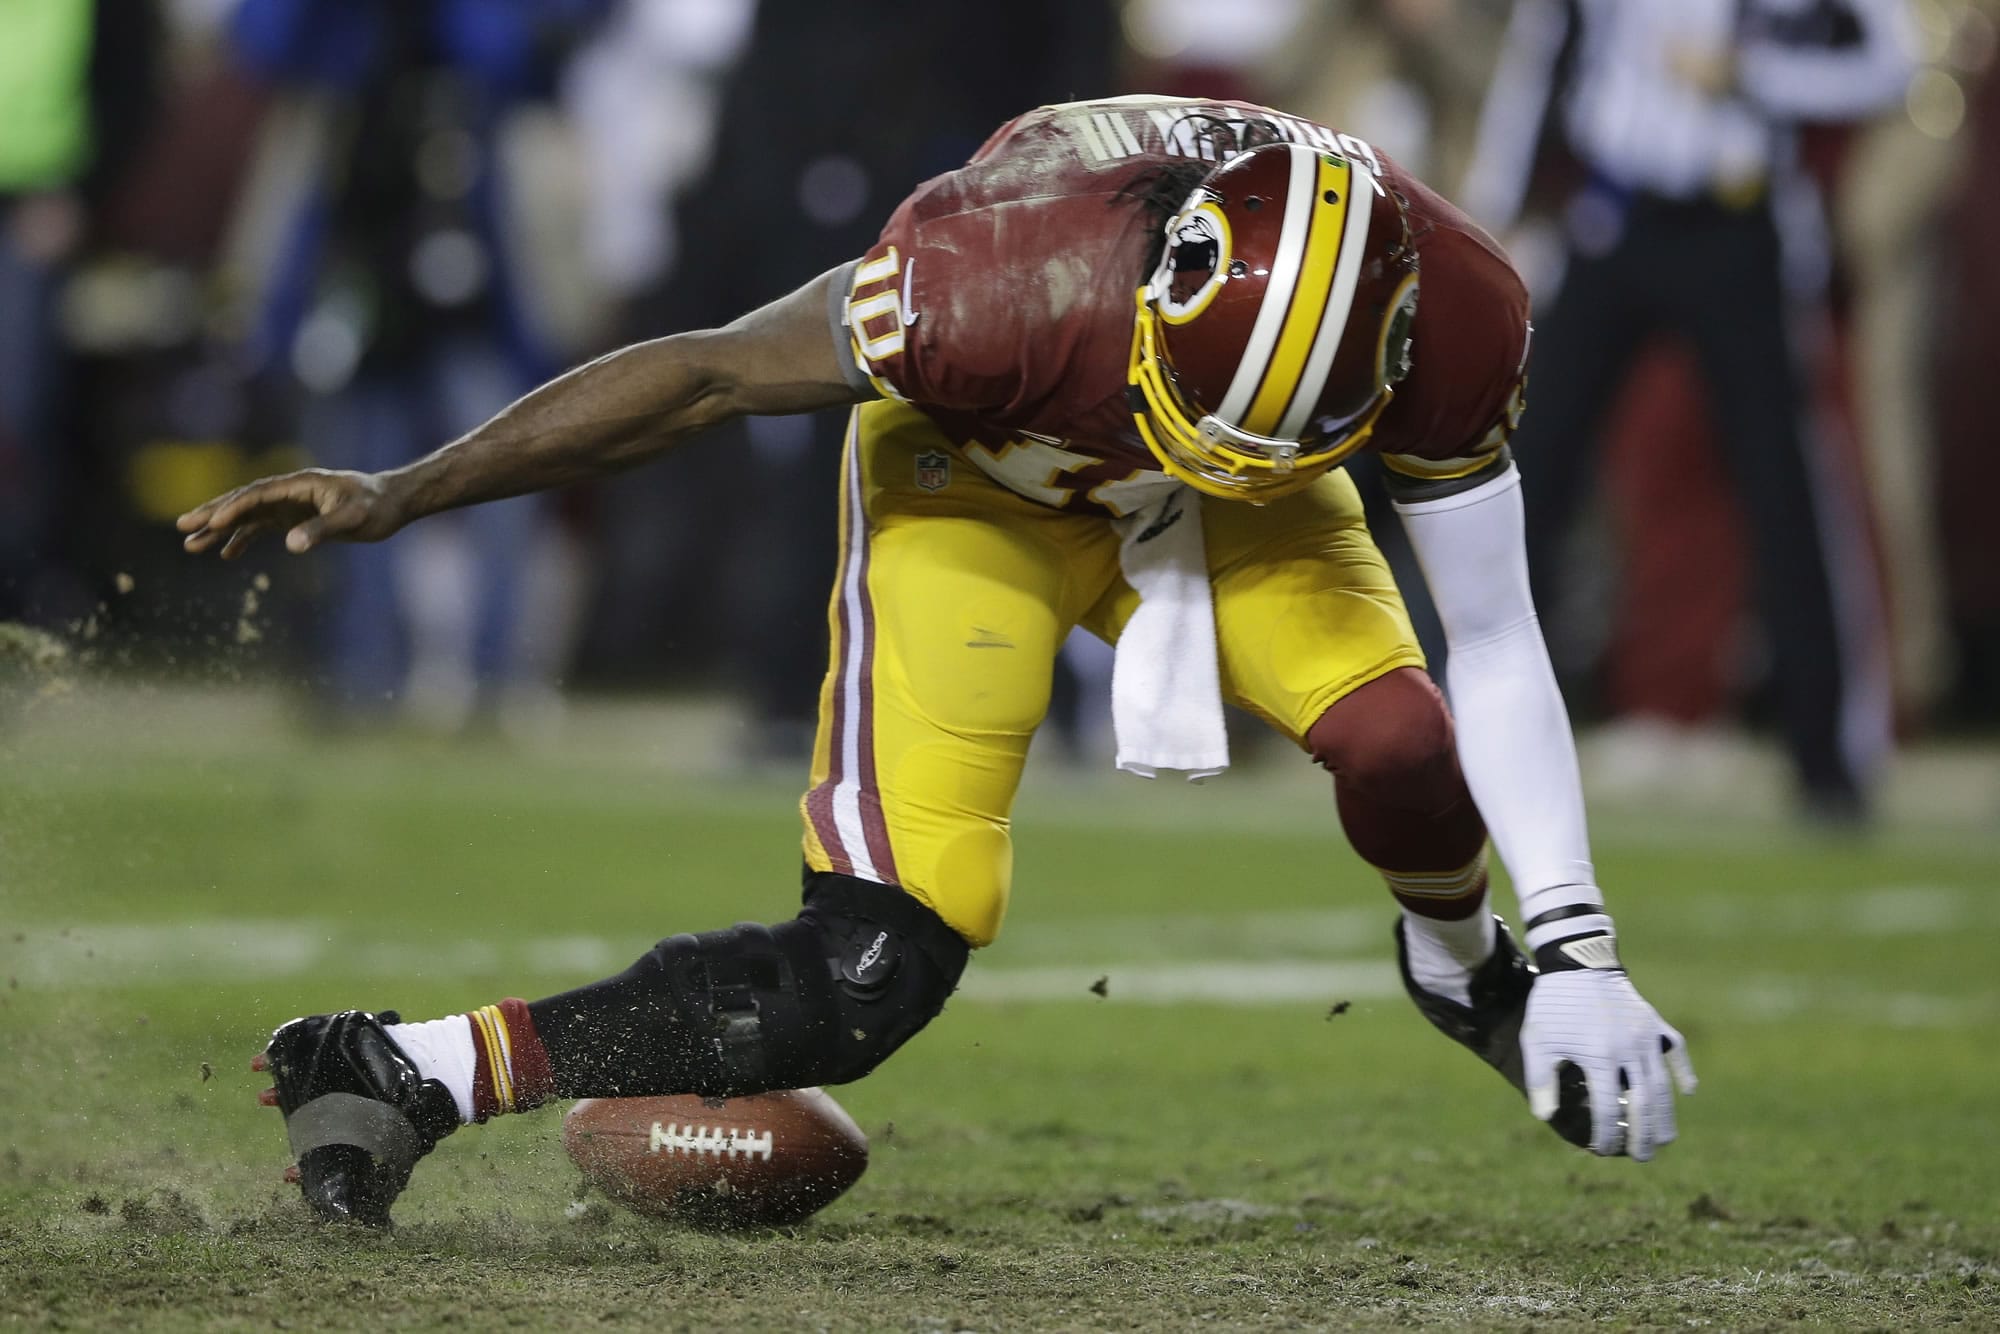 Washington Redskins quarterback Robert Griffin III twists his knees as he reaches for a loose ball after a low snap during the second half Sunday.